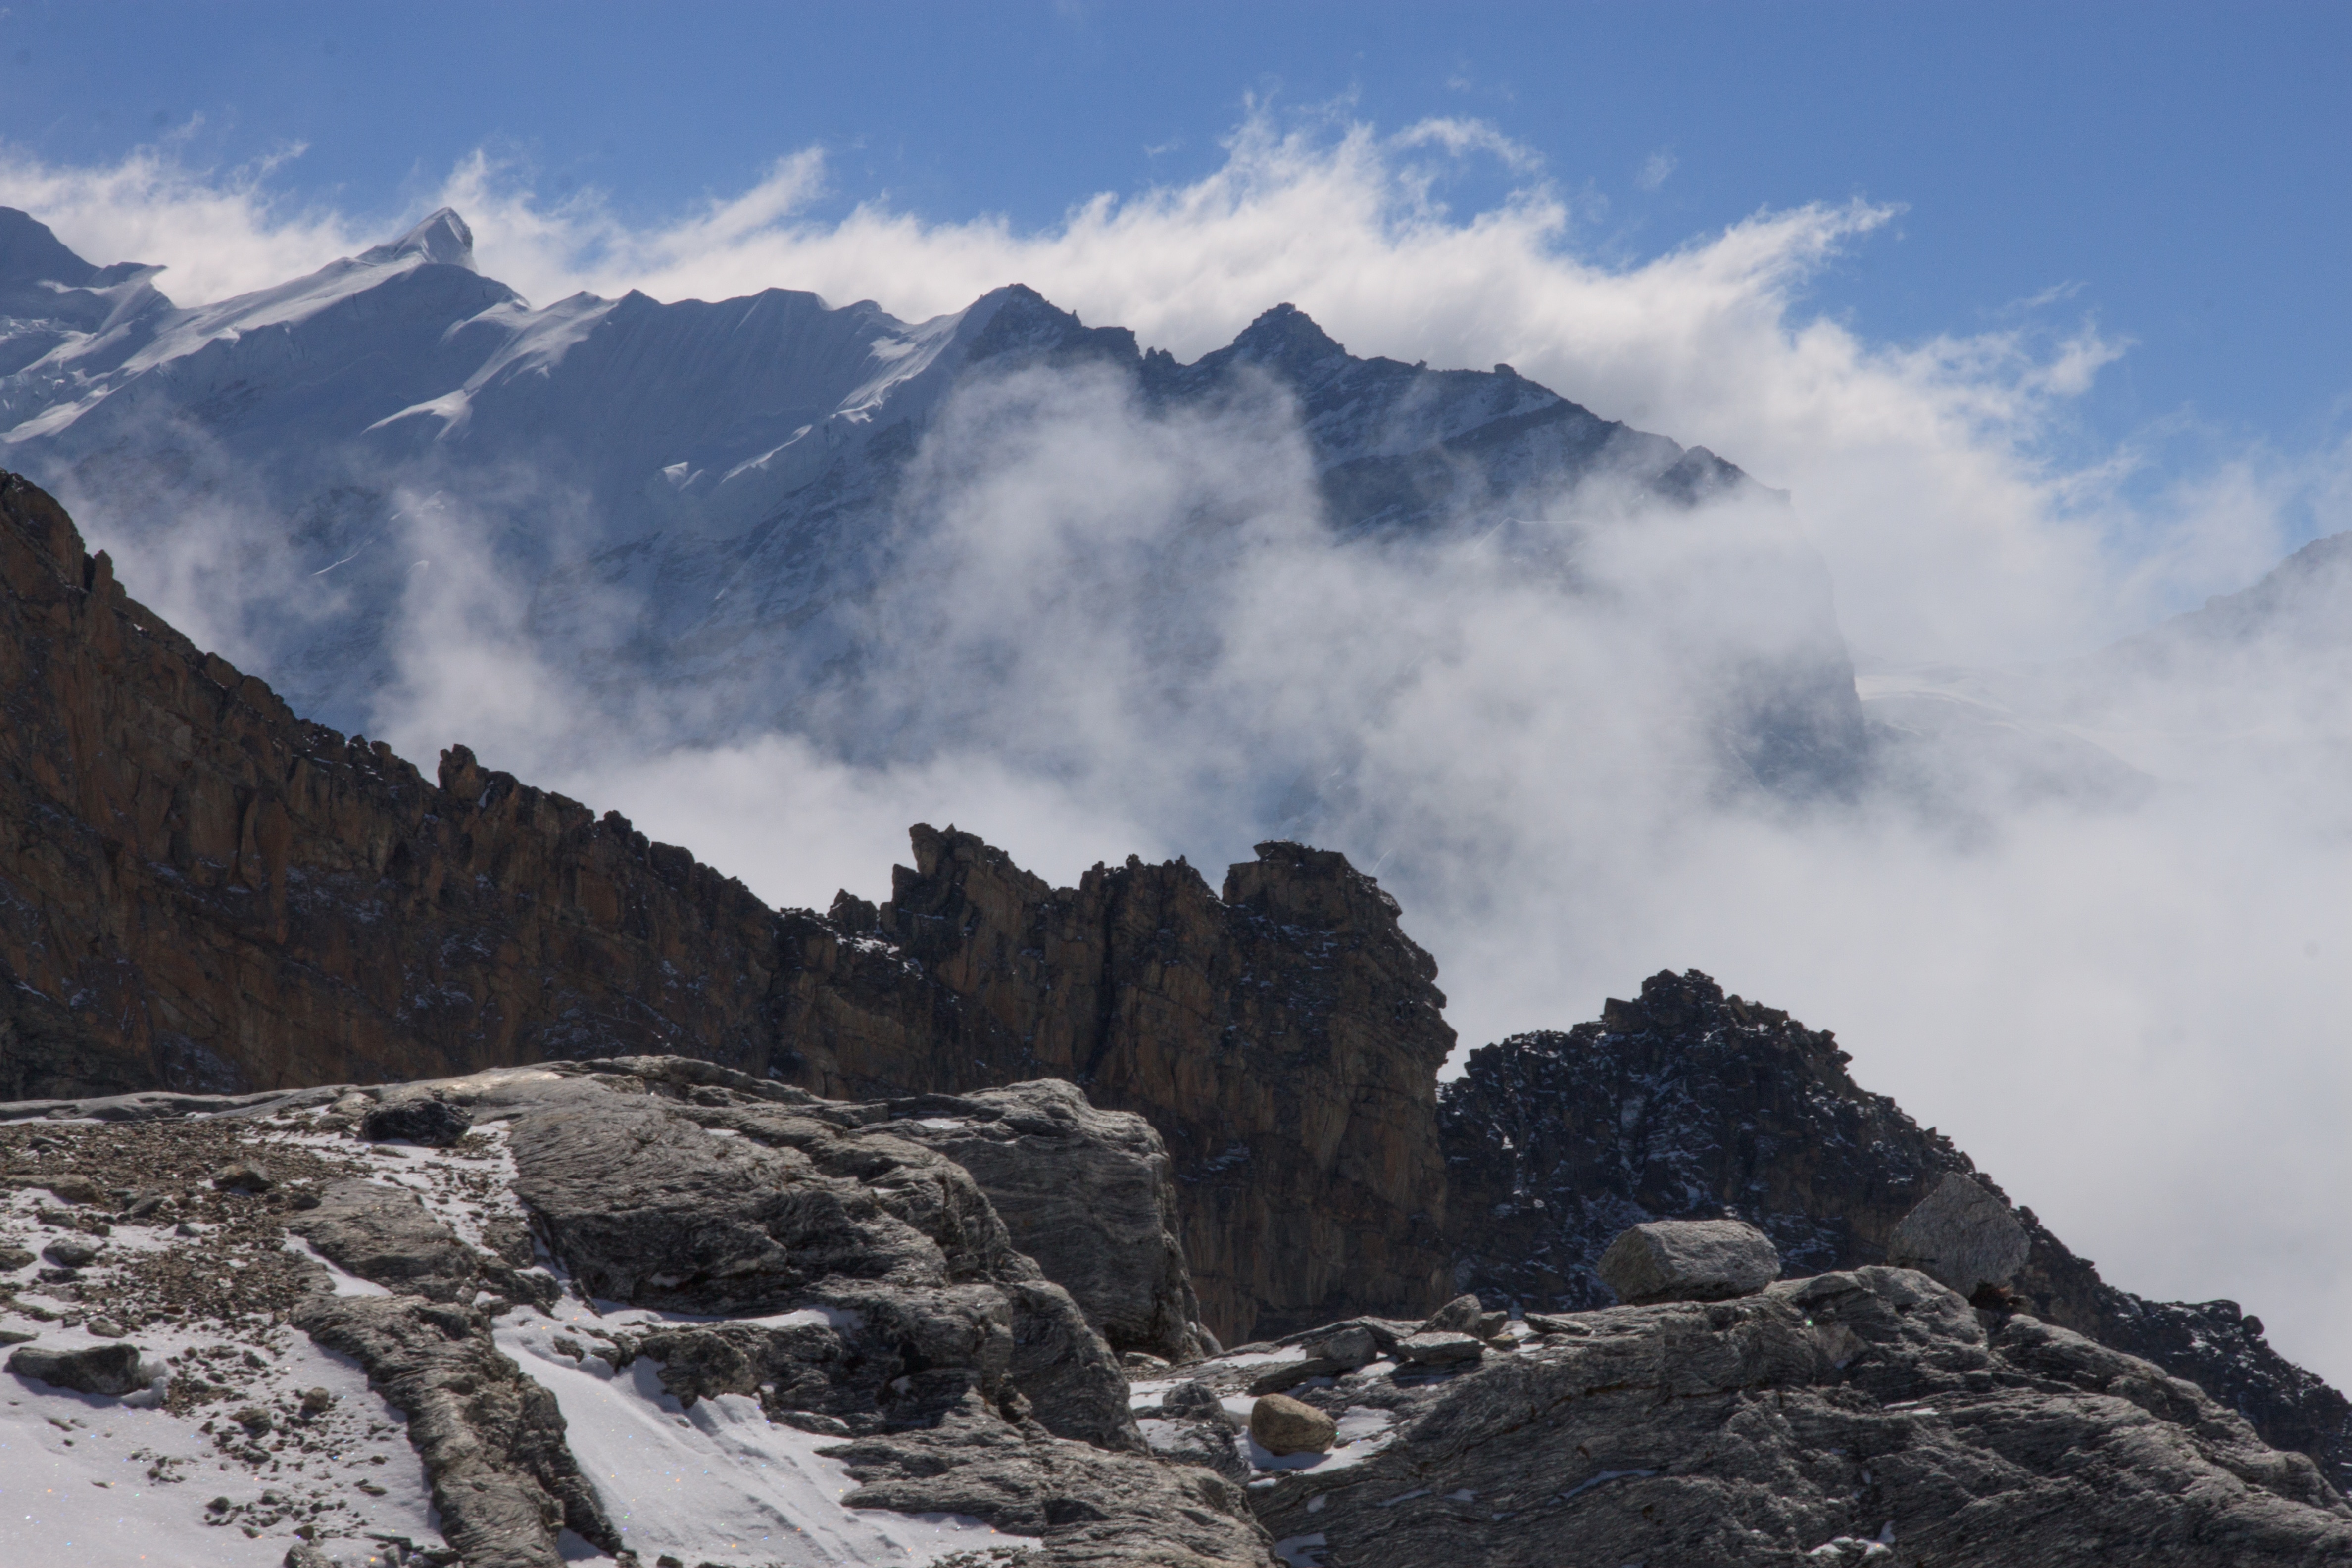 Clouds swirl around the peaks at Base Camp